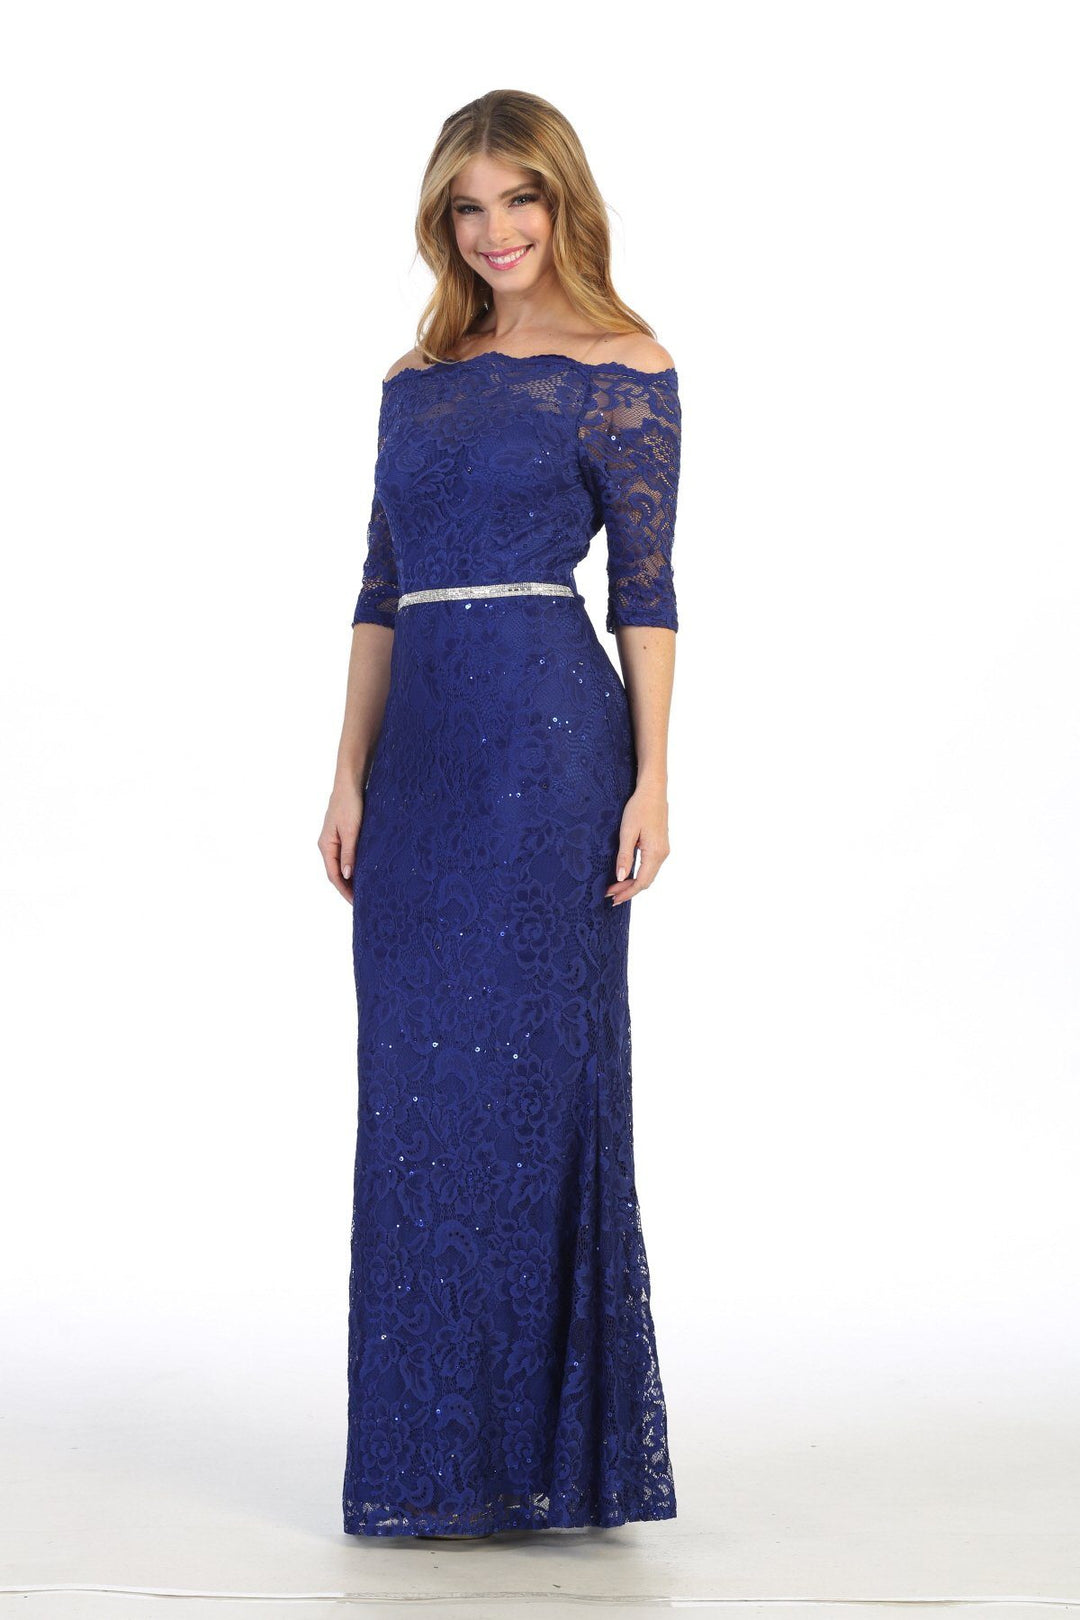 Long Off Shoulder Lace Dress with Beaded Waist by Celavie 6390L